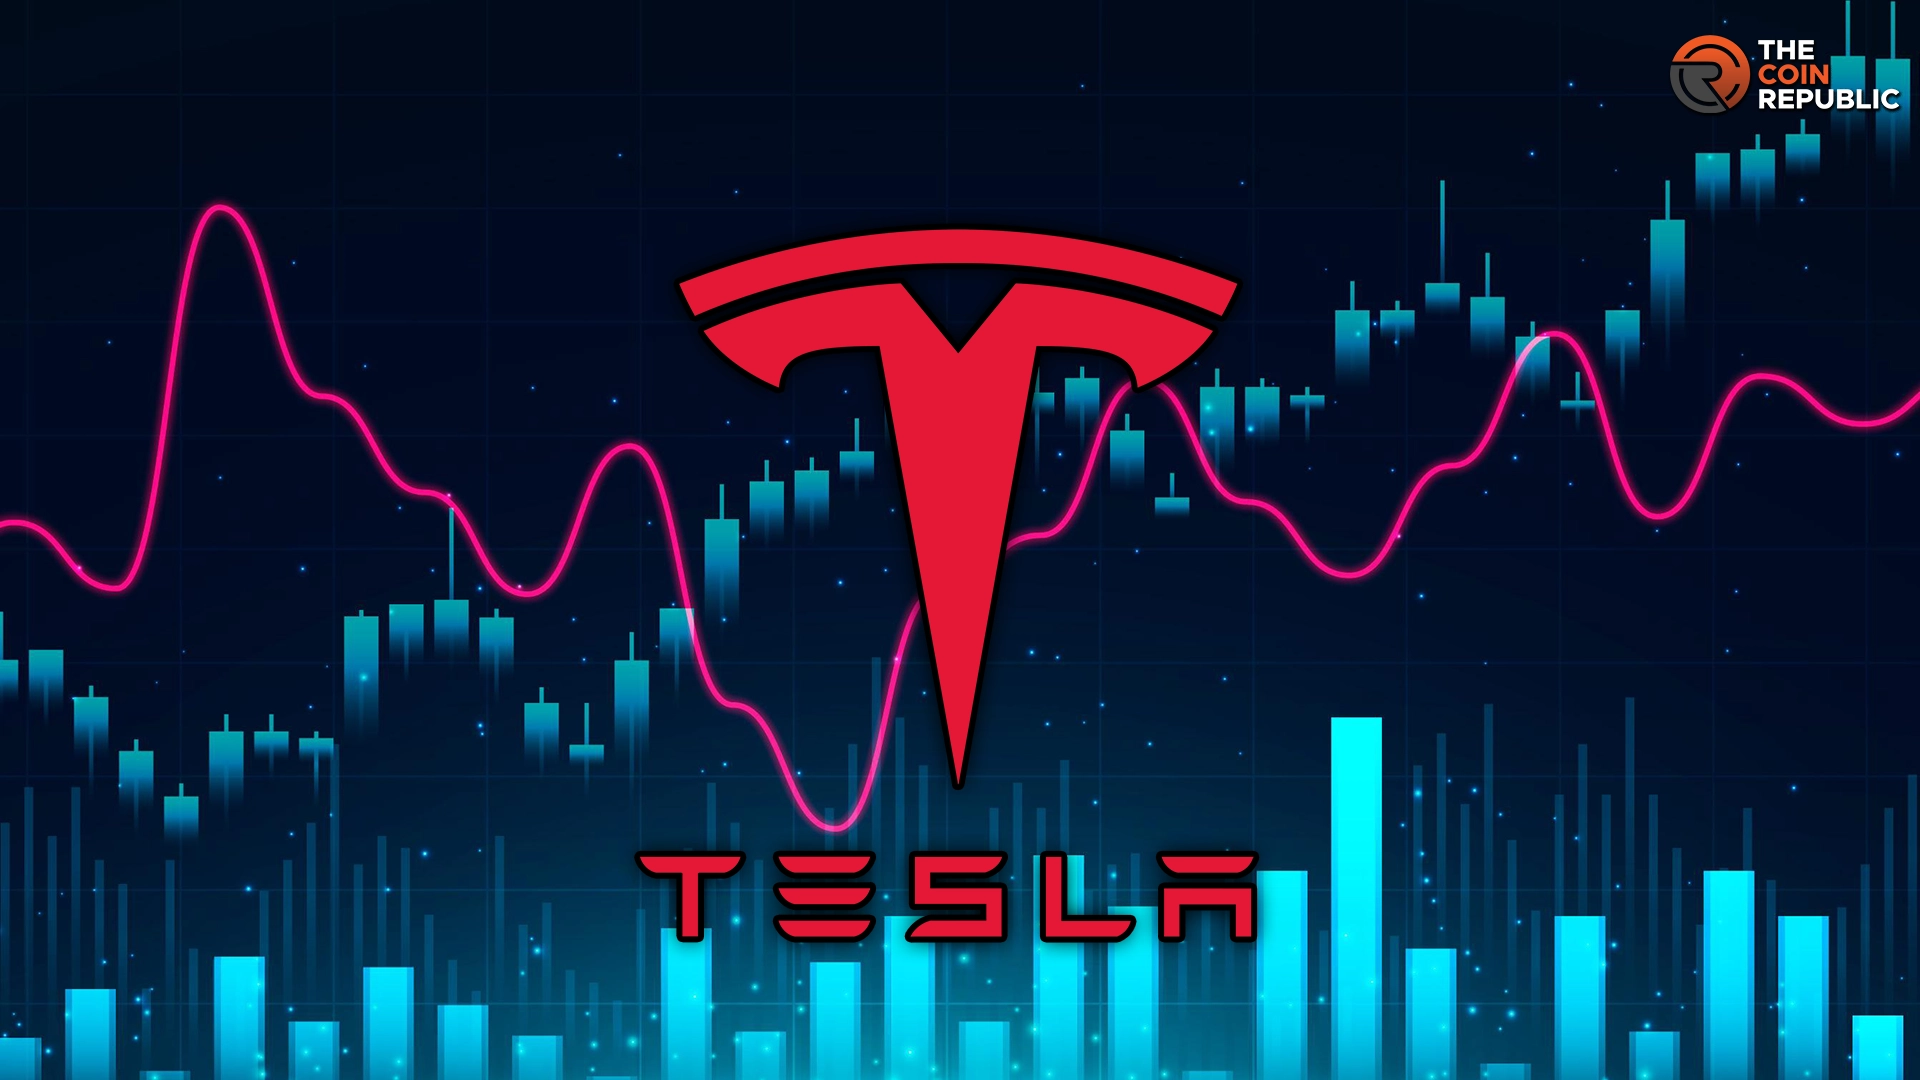 Tesla’s Share Spiked 13% After Musk’s New EV Production Statement